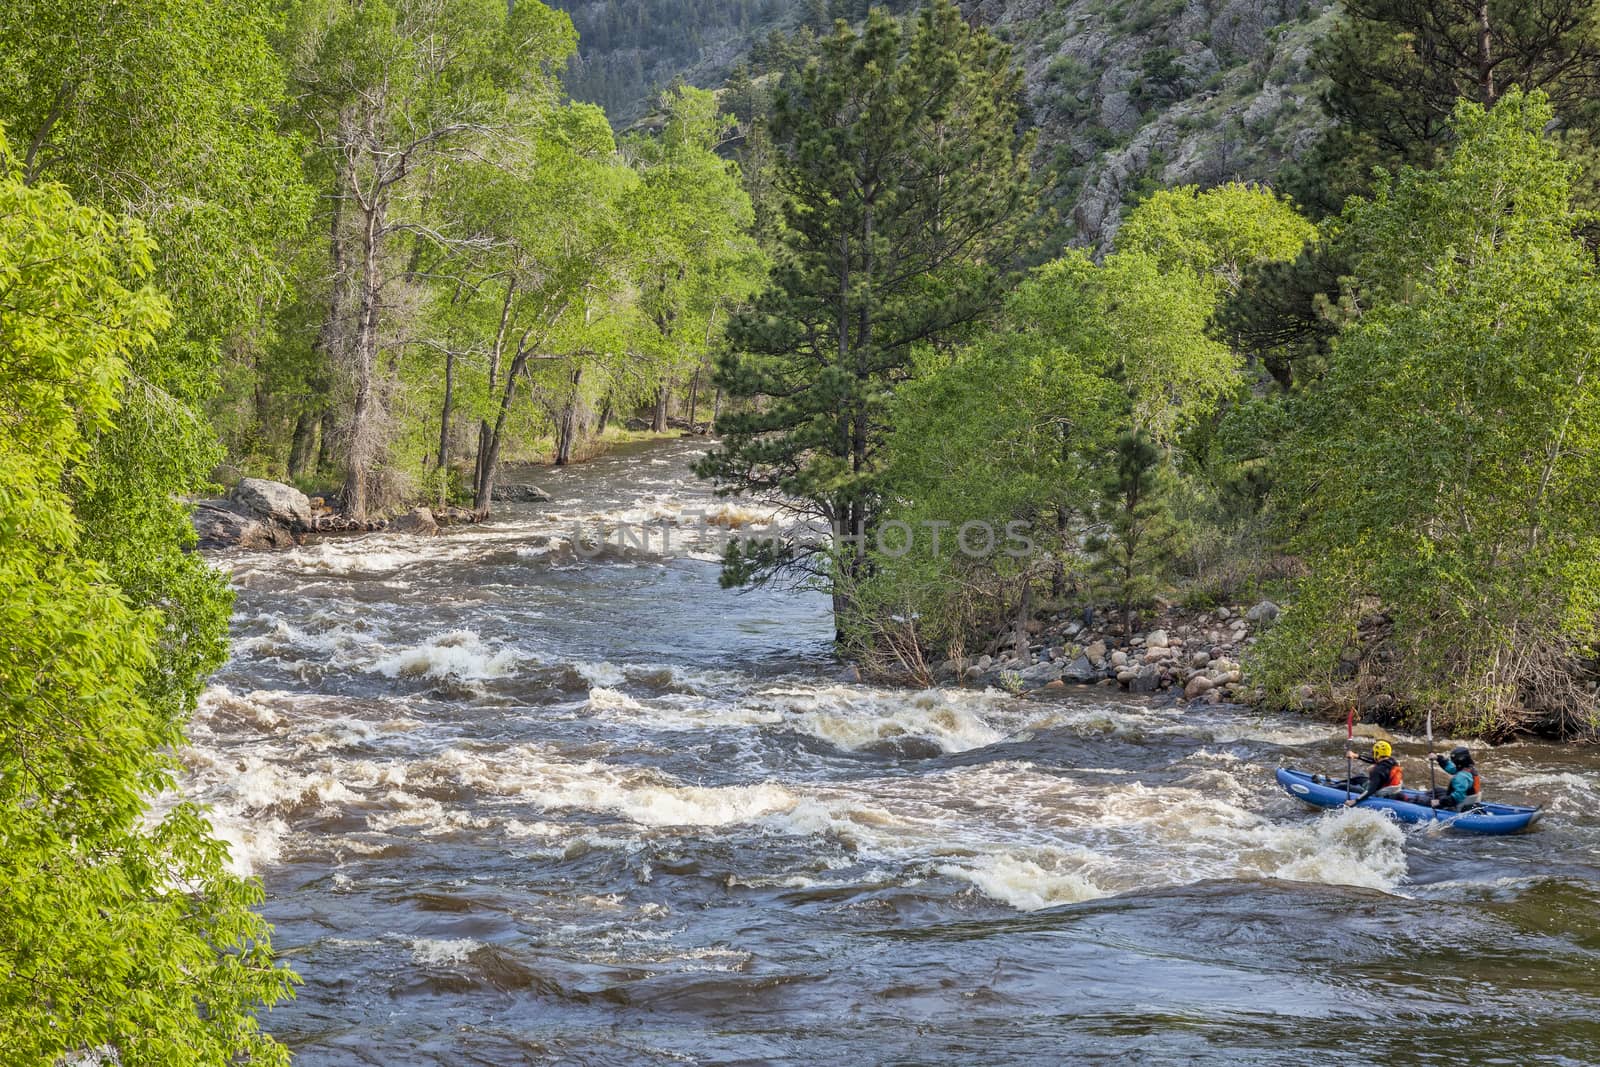 FORT COLLINS, COLORADO, USA - JUNE 4, 2011: Kayakers floating over Maddog Rapid on Cache la Poudre River west of Fort Collins, Colorado as the snow pack in the high country begins to melt.